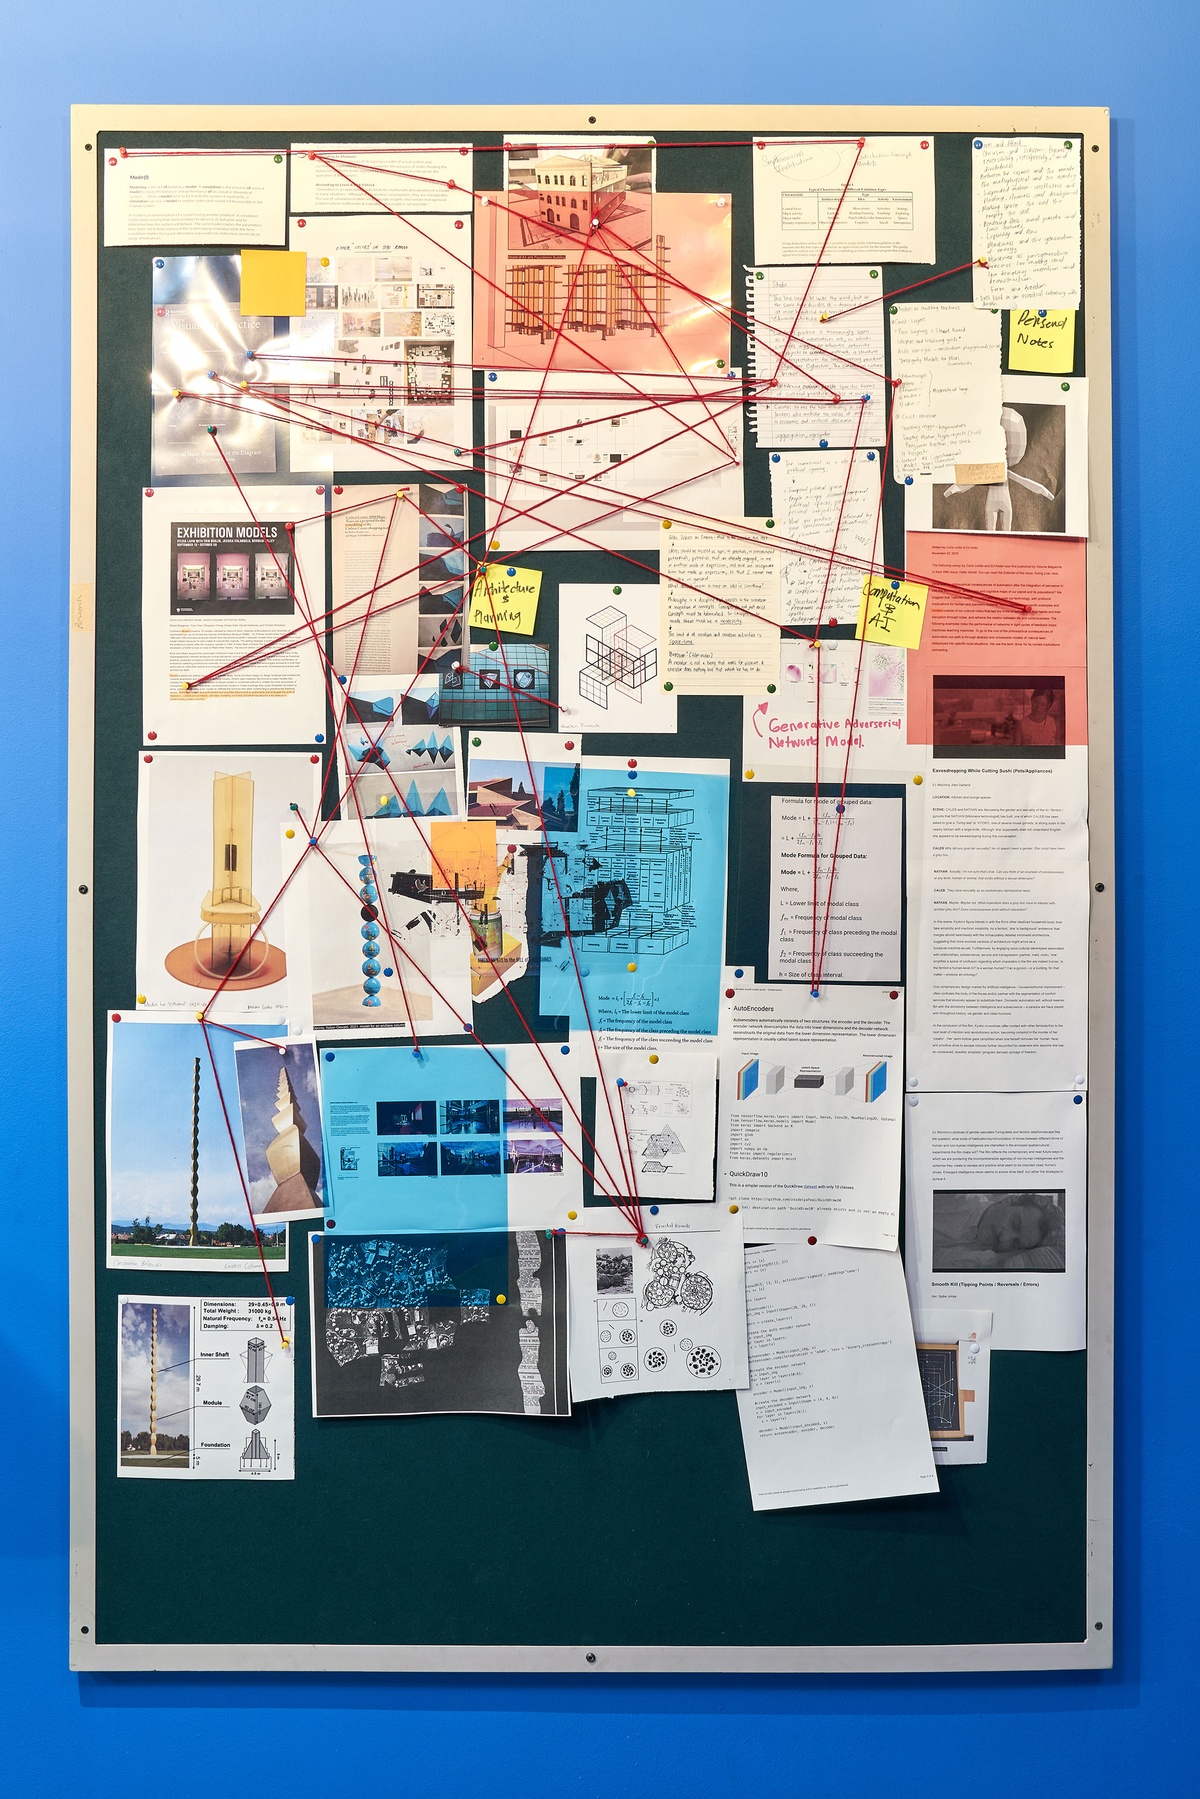 Installation photograph from the ‘mode(l)’ exhibition in A4’s Goods project space, that depicts a pin board with research material assembled by curator Nkhensani Mkhari.
